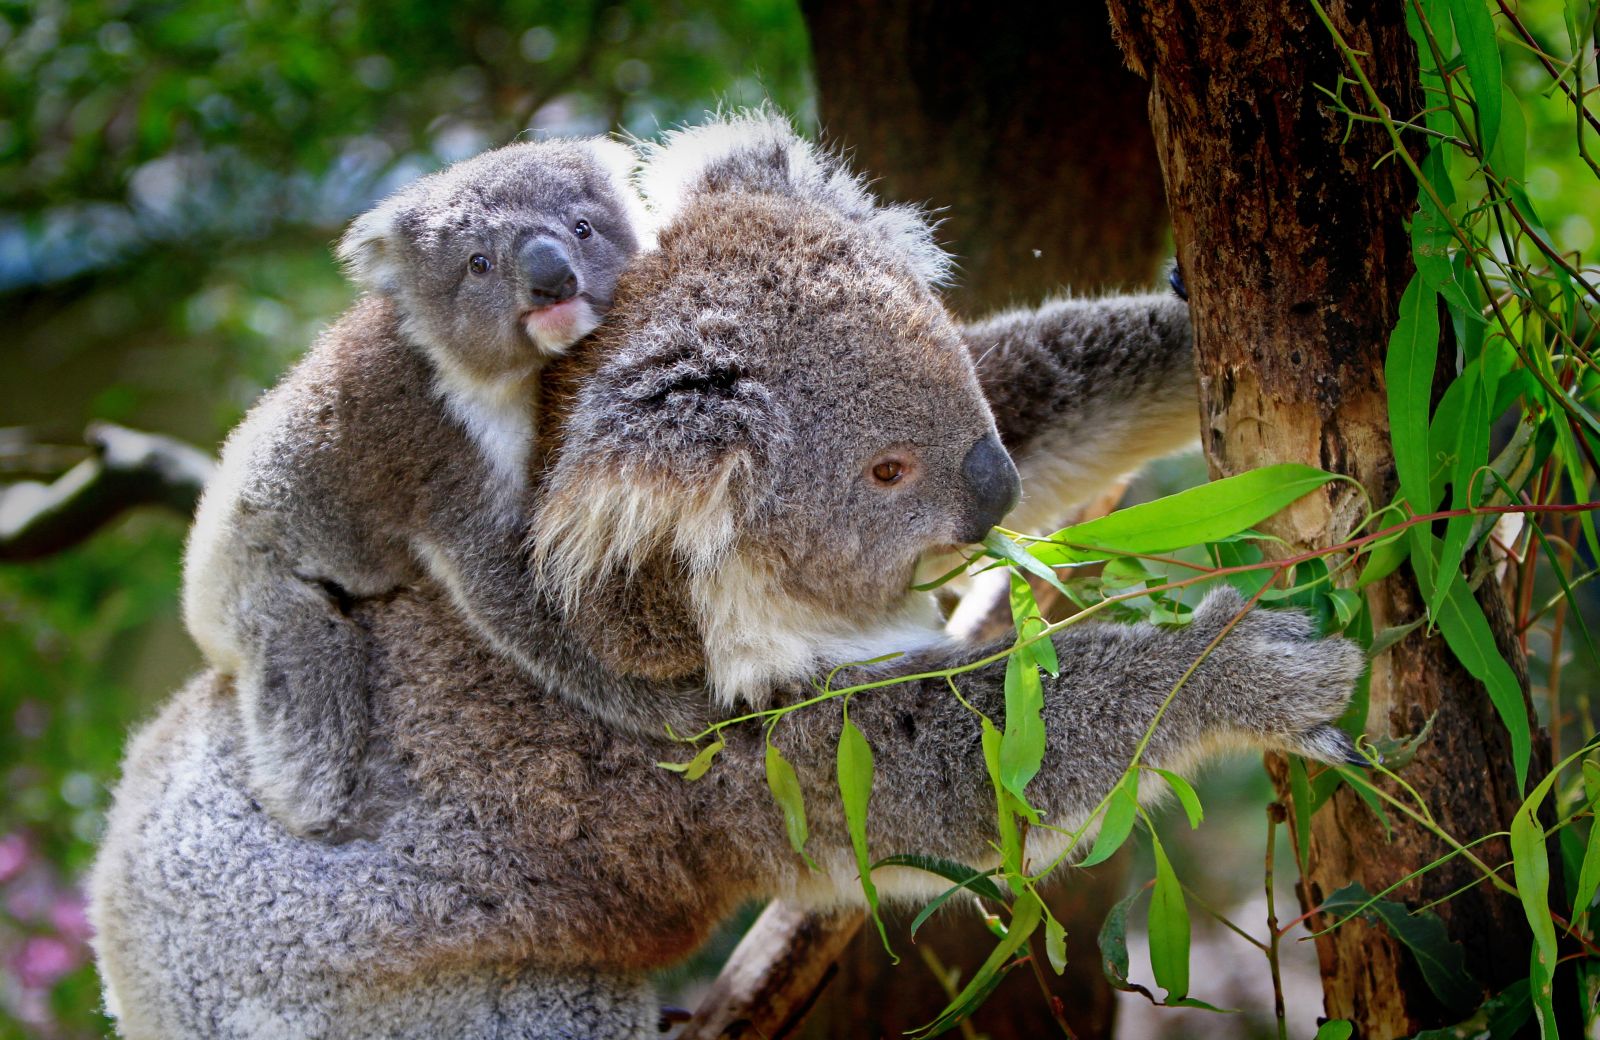 Mother and baby koala in a tree in Australia